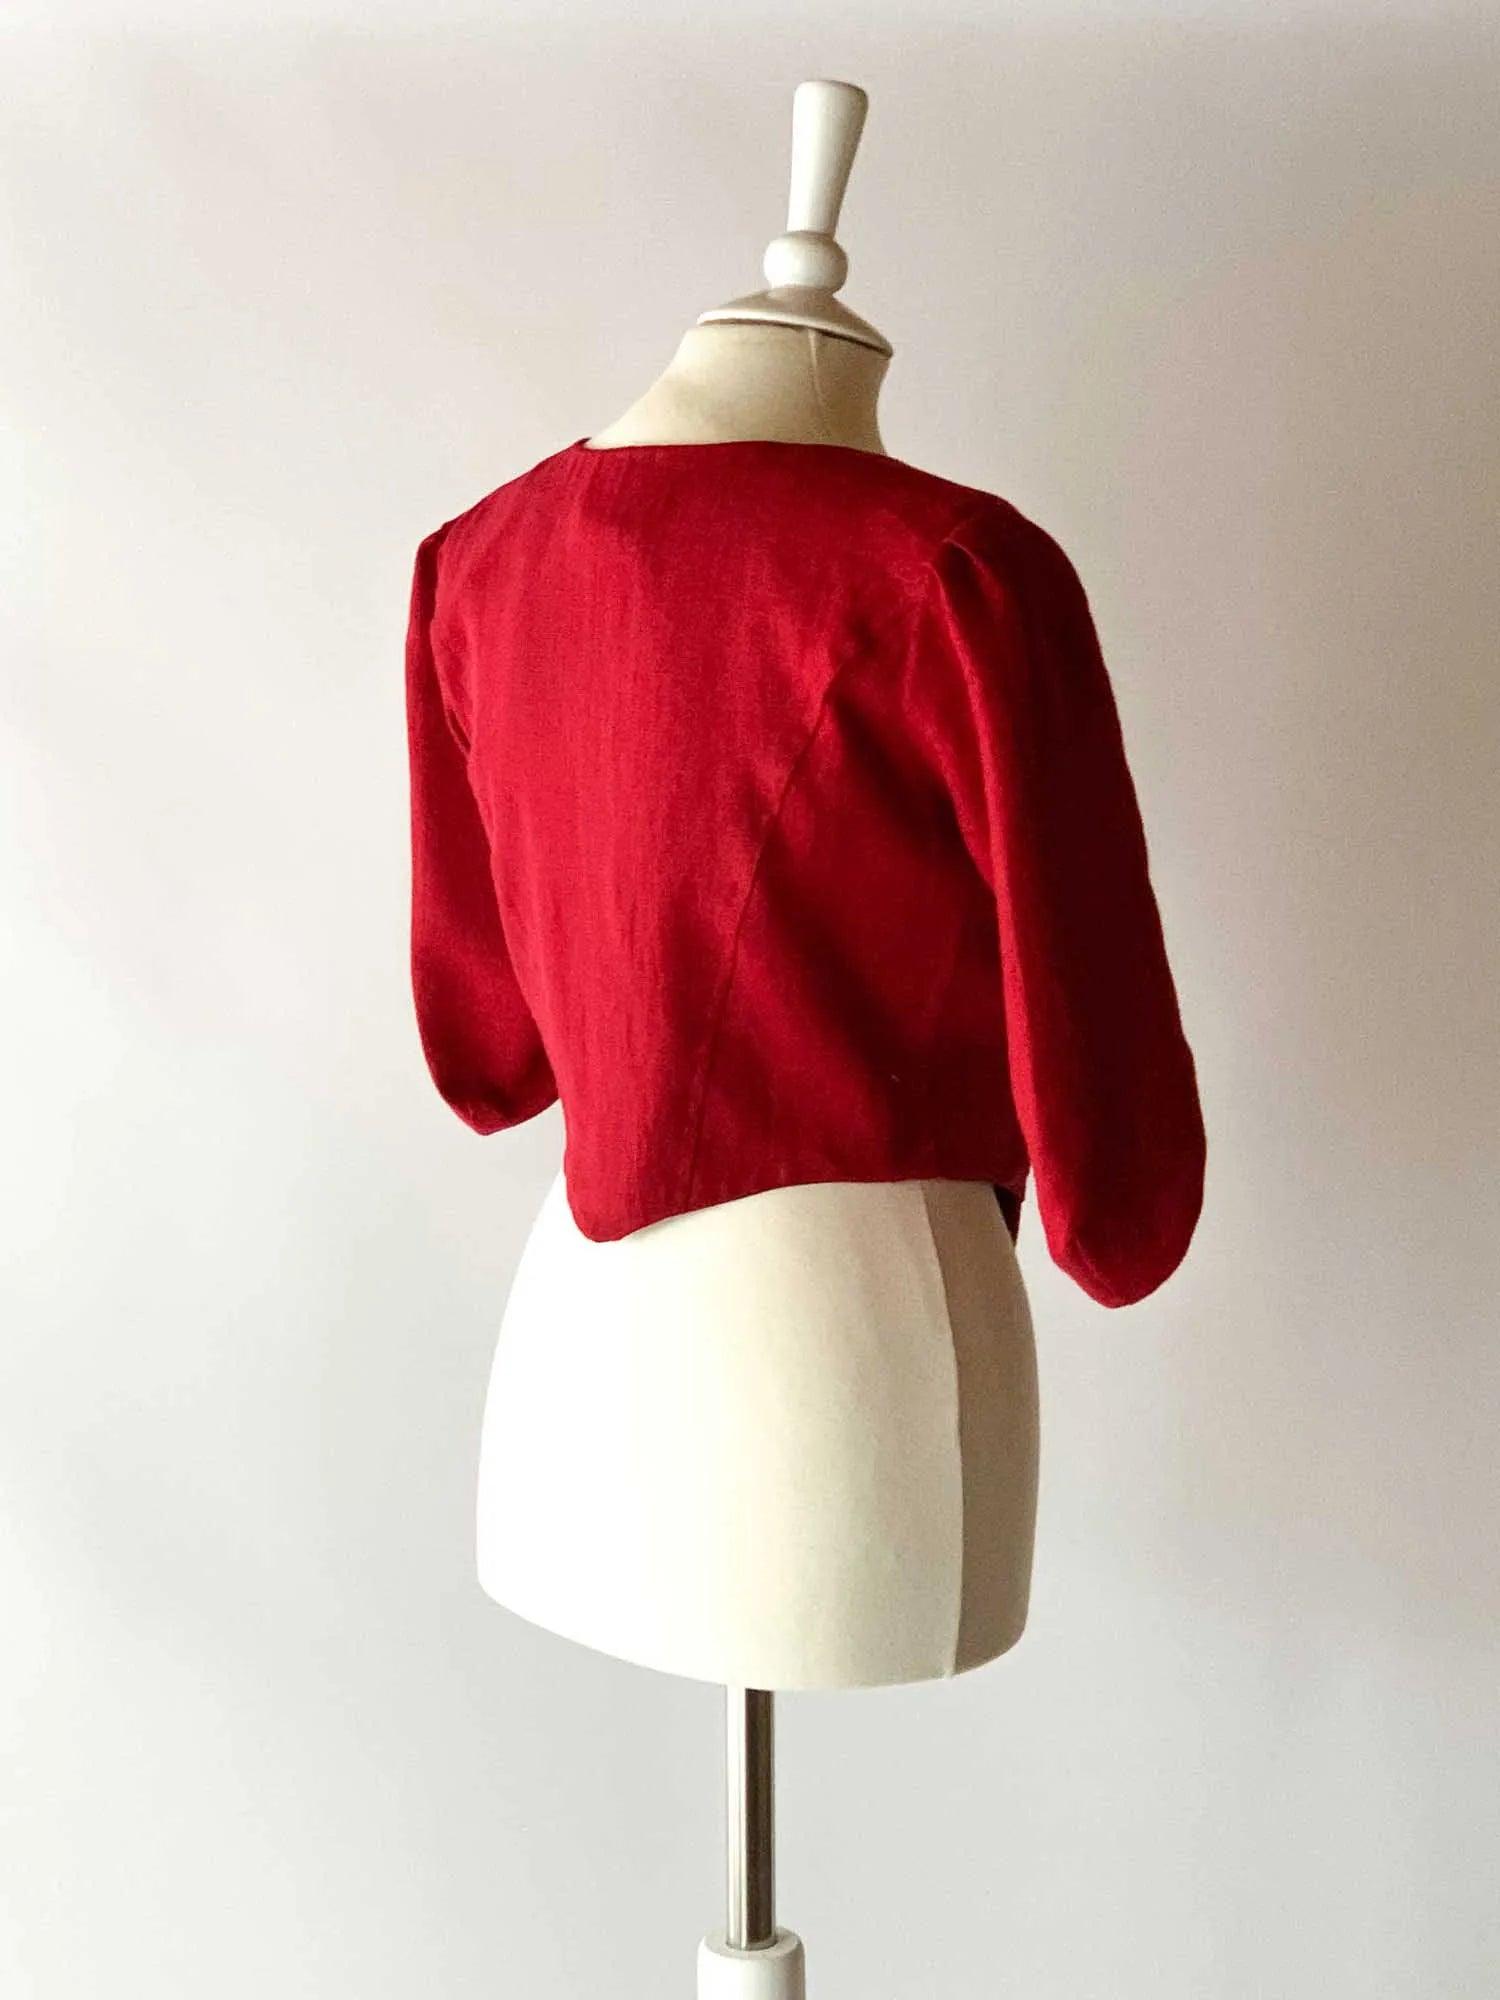 Lace Up Bodice in Cherry Red Linen - Atelier Serraspina